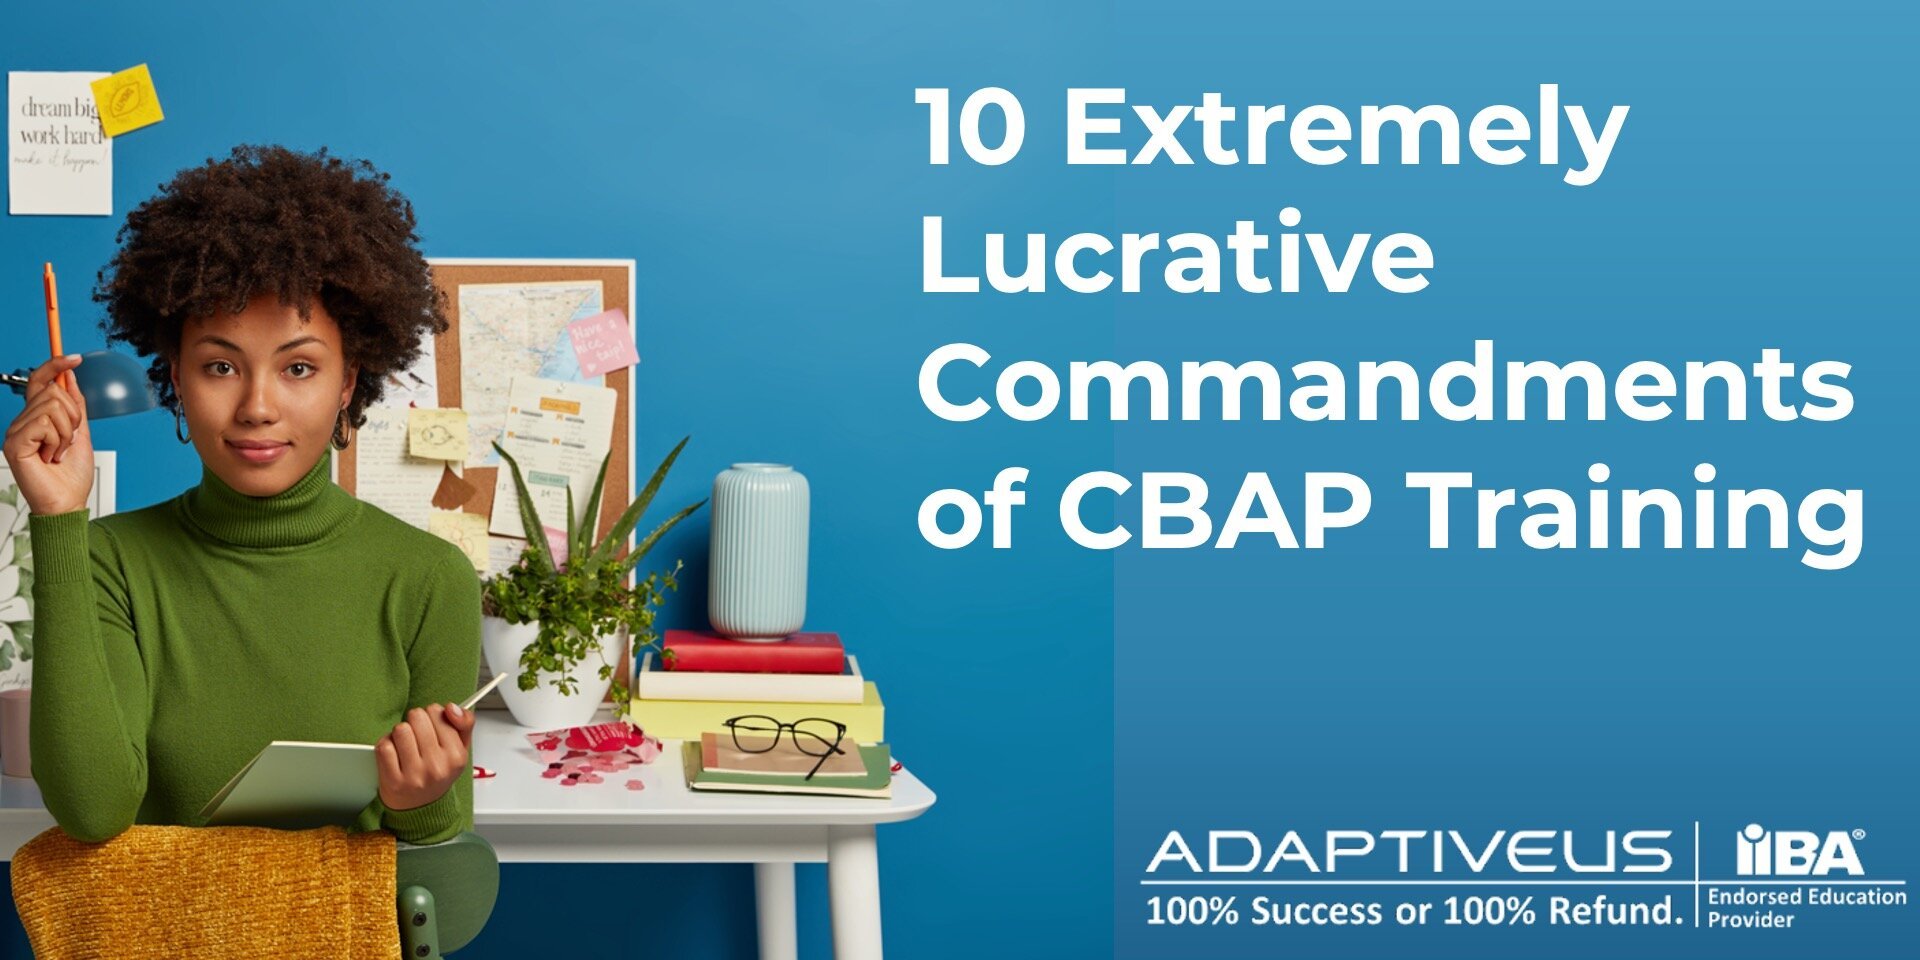 The 10 Extremely Lucrative Commandments of CBAP Training